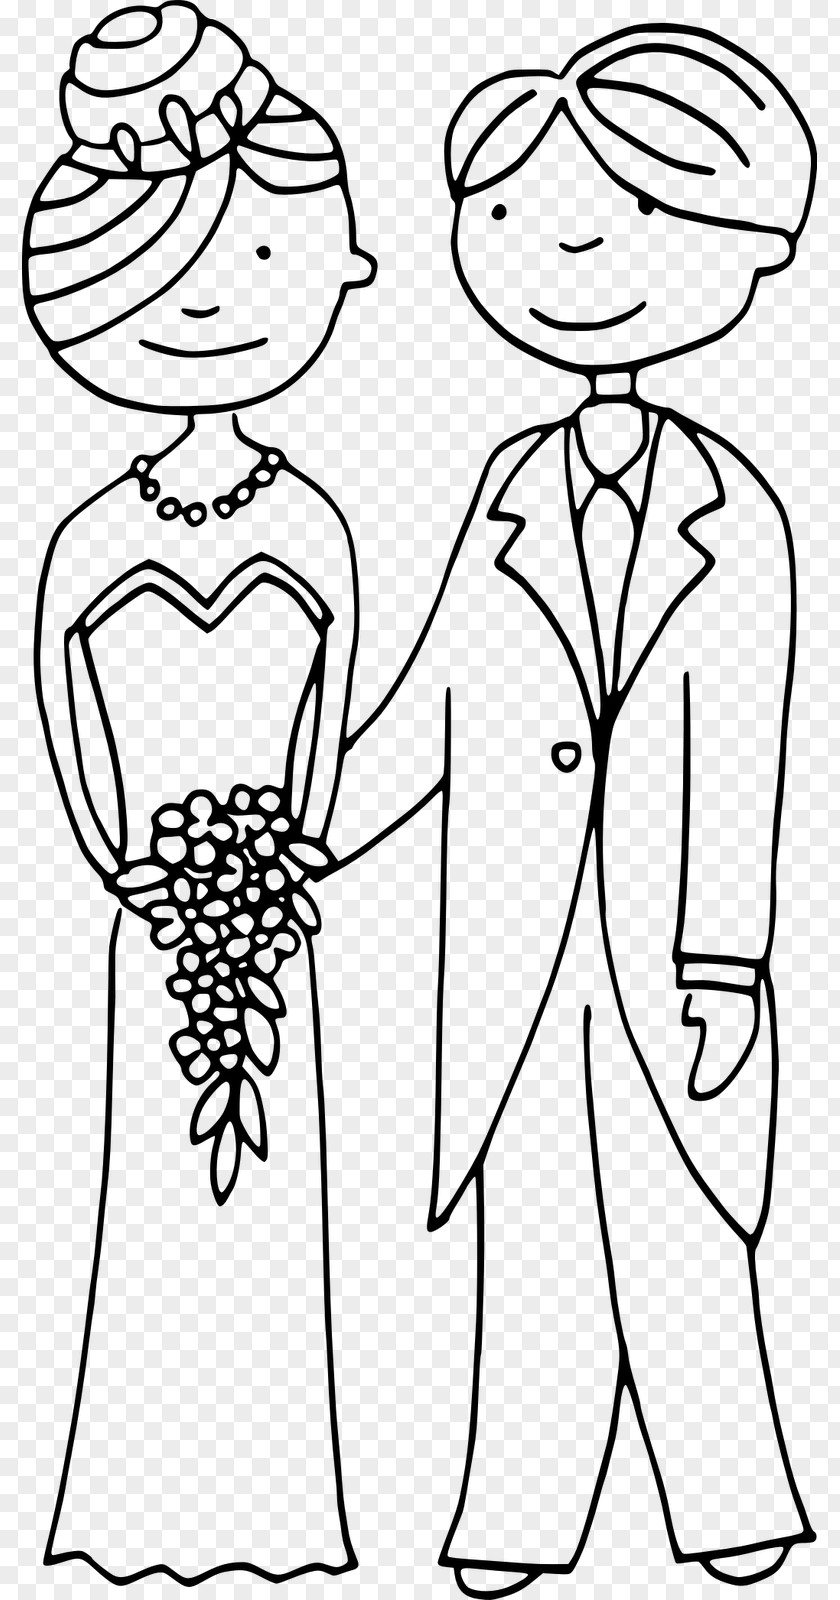 Wedding Invitation Couple Drawing Line Art Coloring Book Postage Stamps PNG